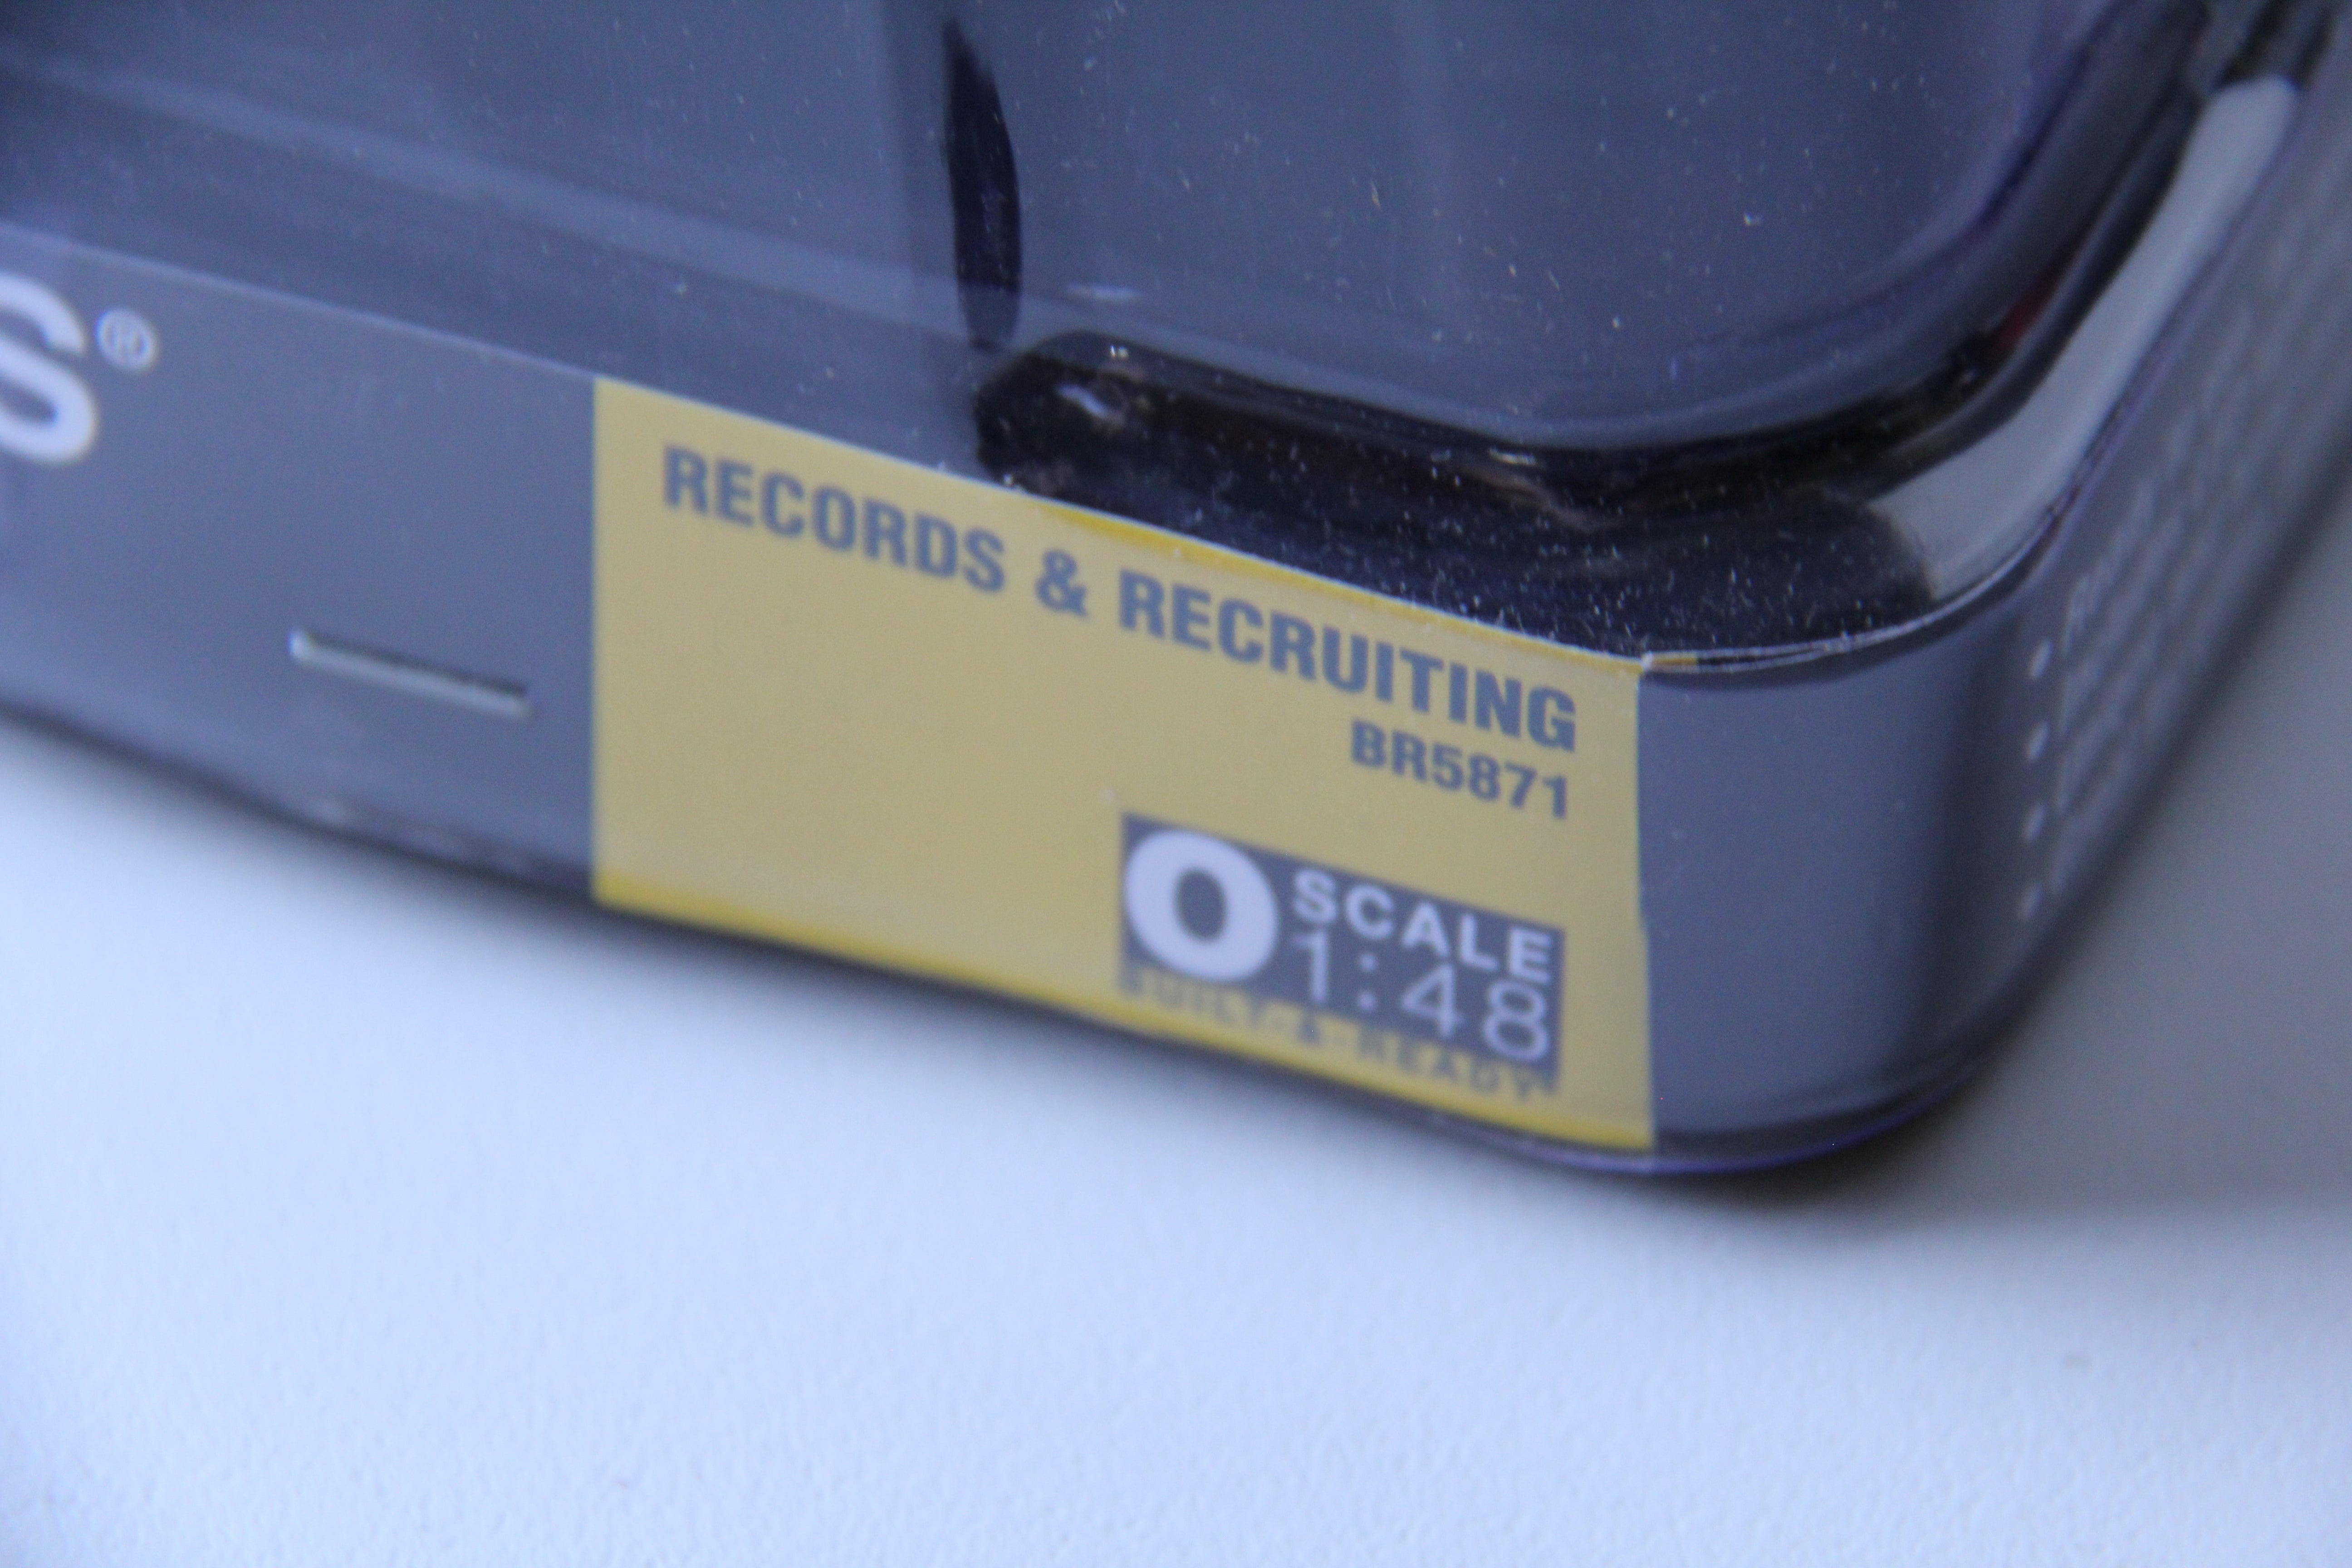 Woodland Scenics BR5871 Records & Recruiting-Second hand-M2409